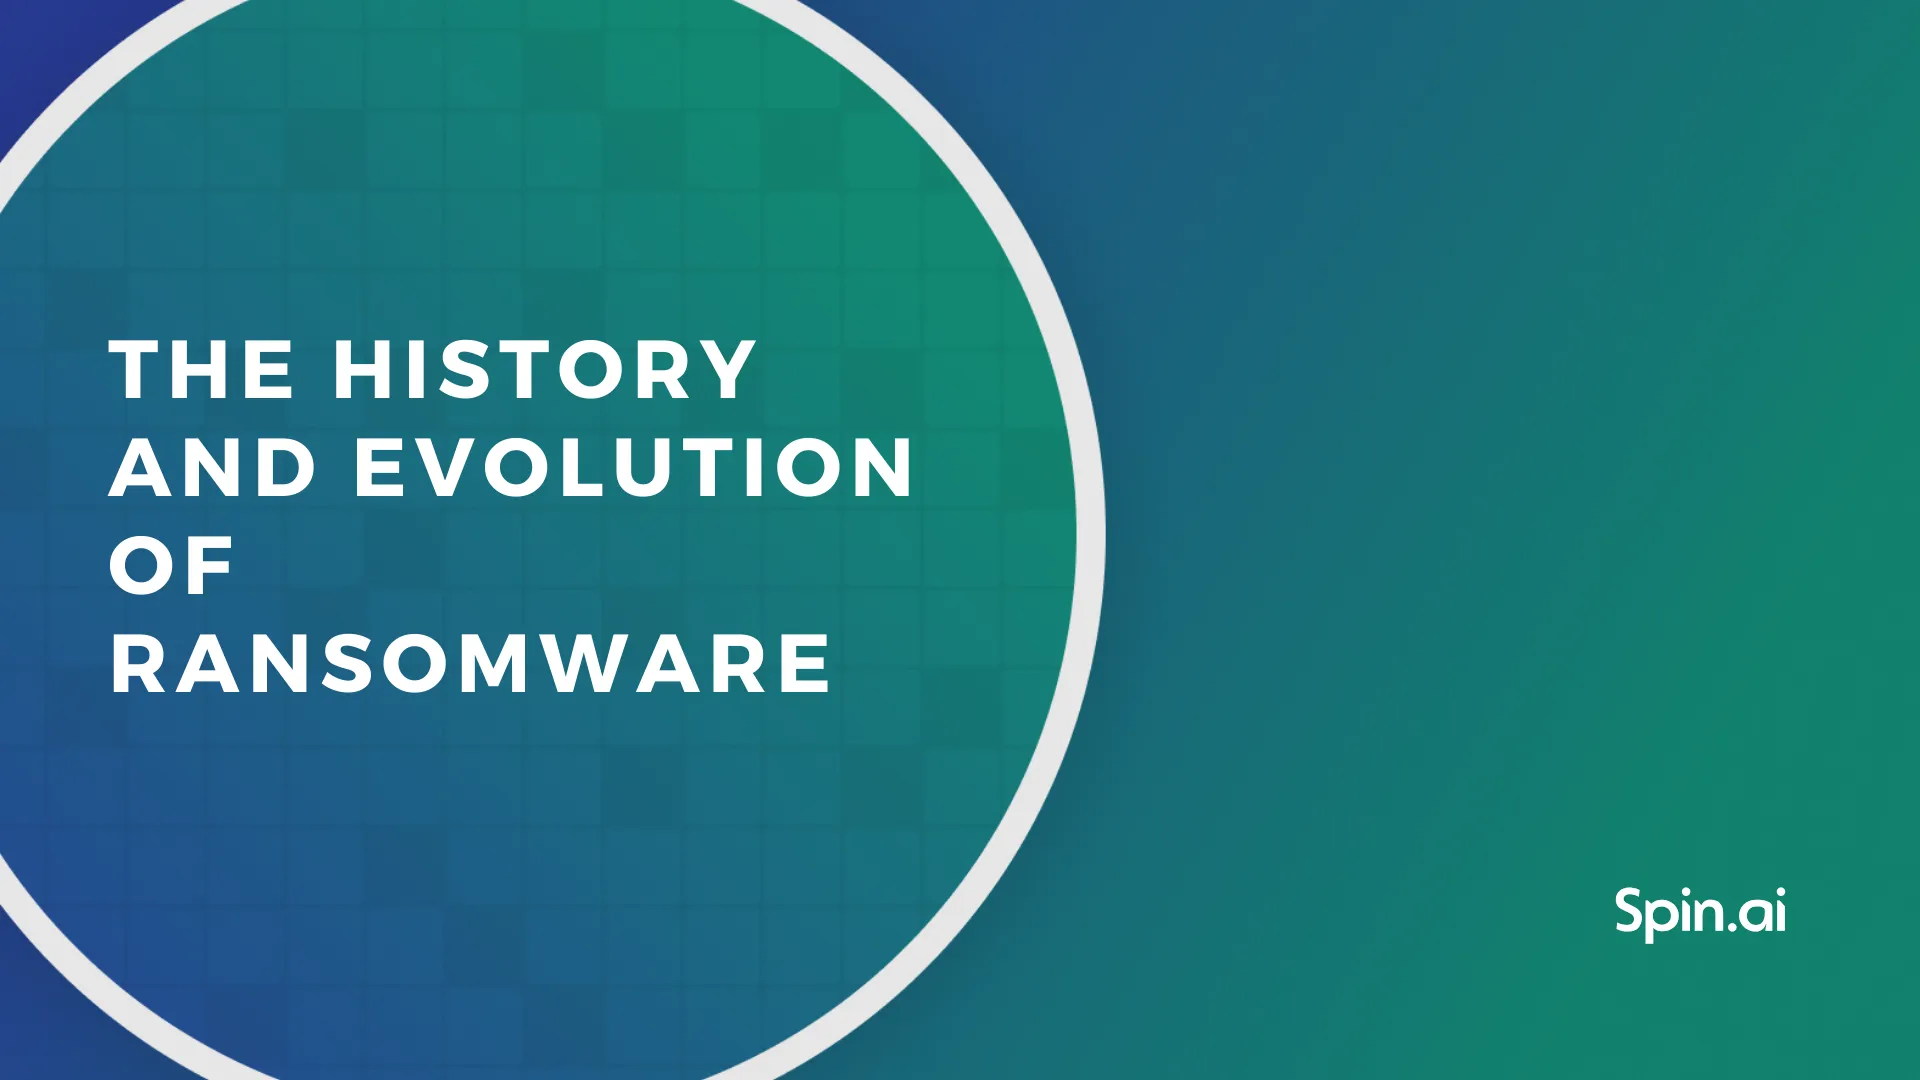 The History and Evolution of Ransomware